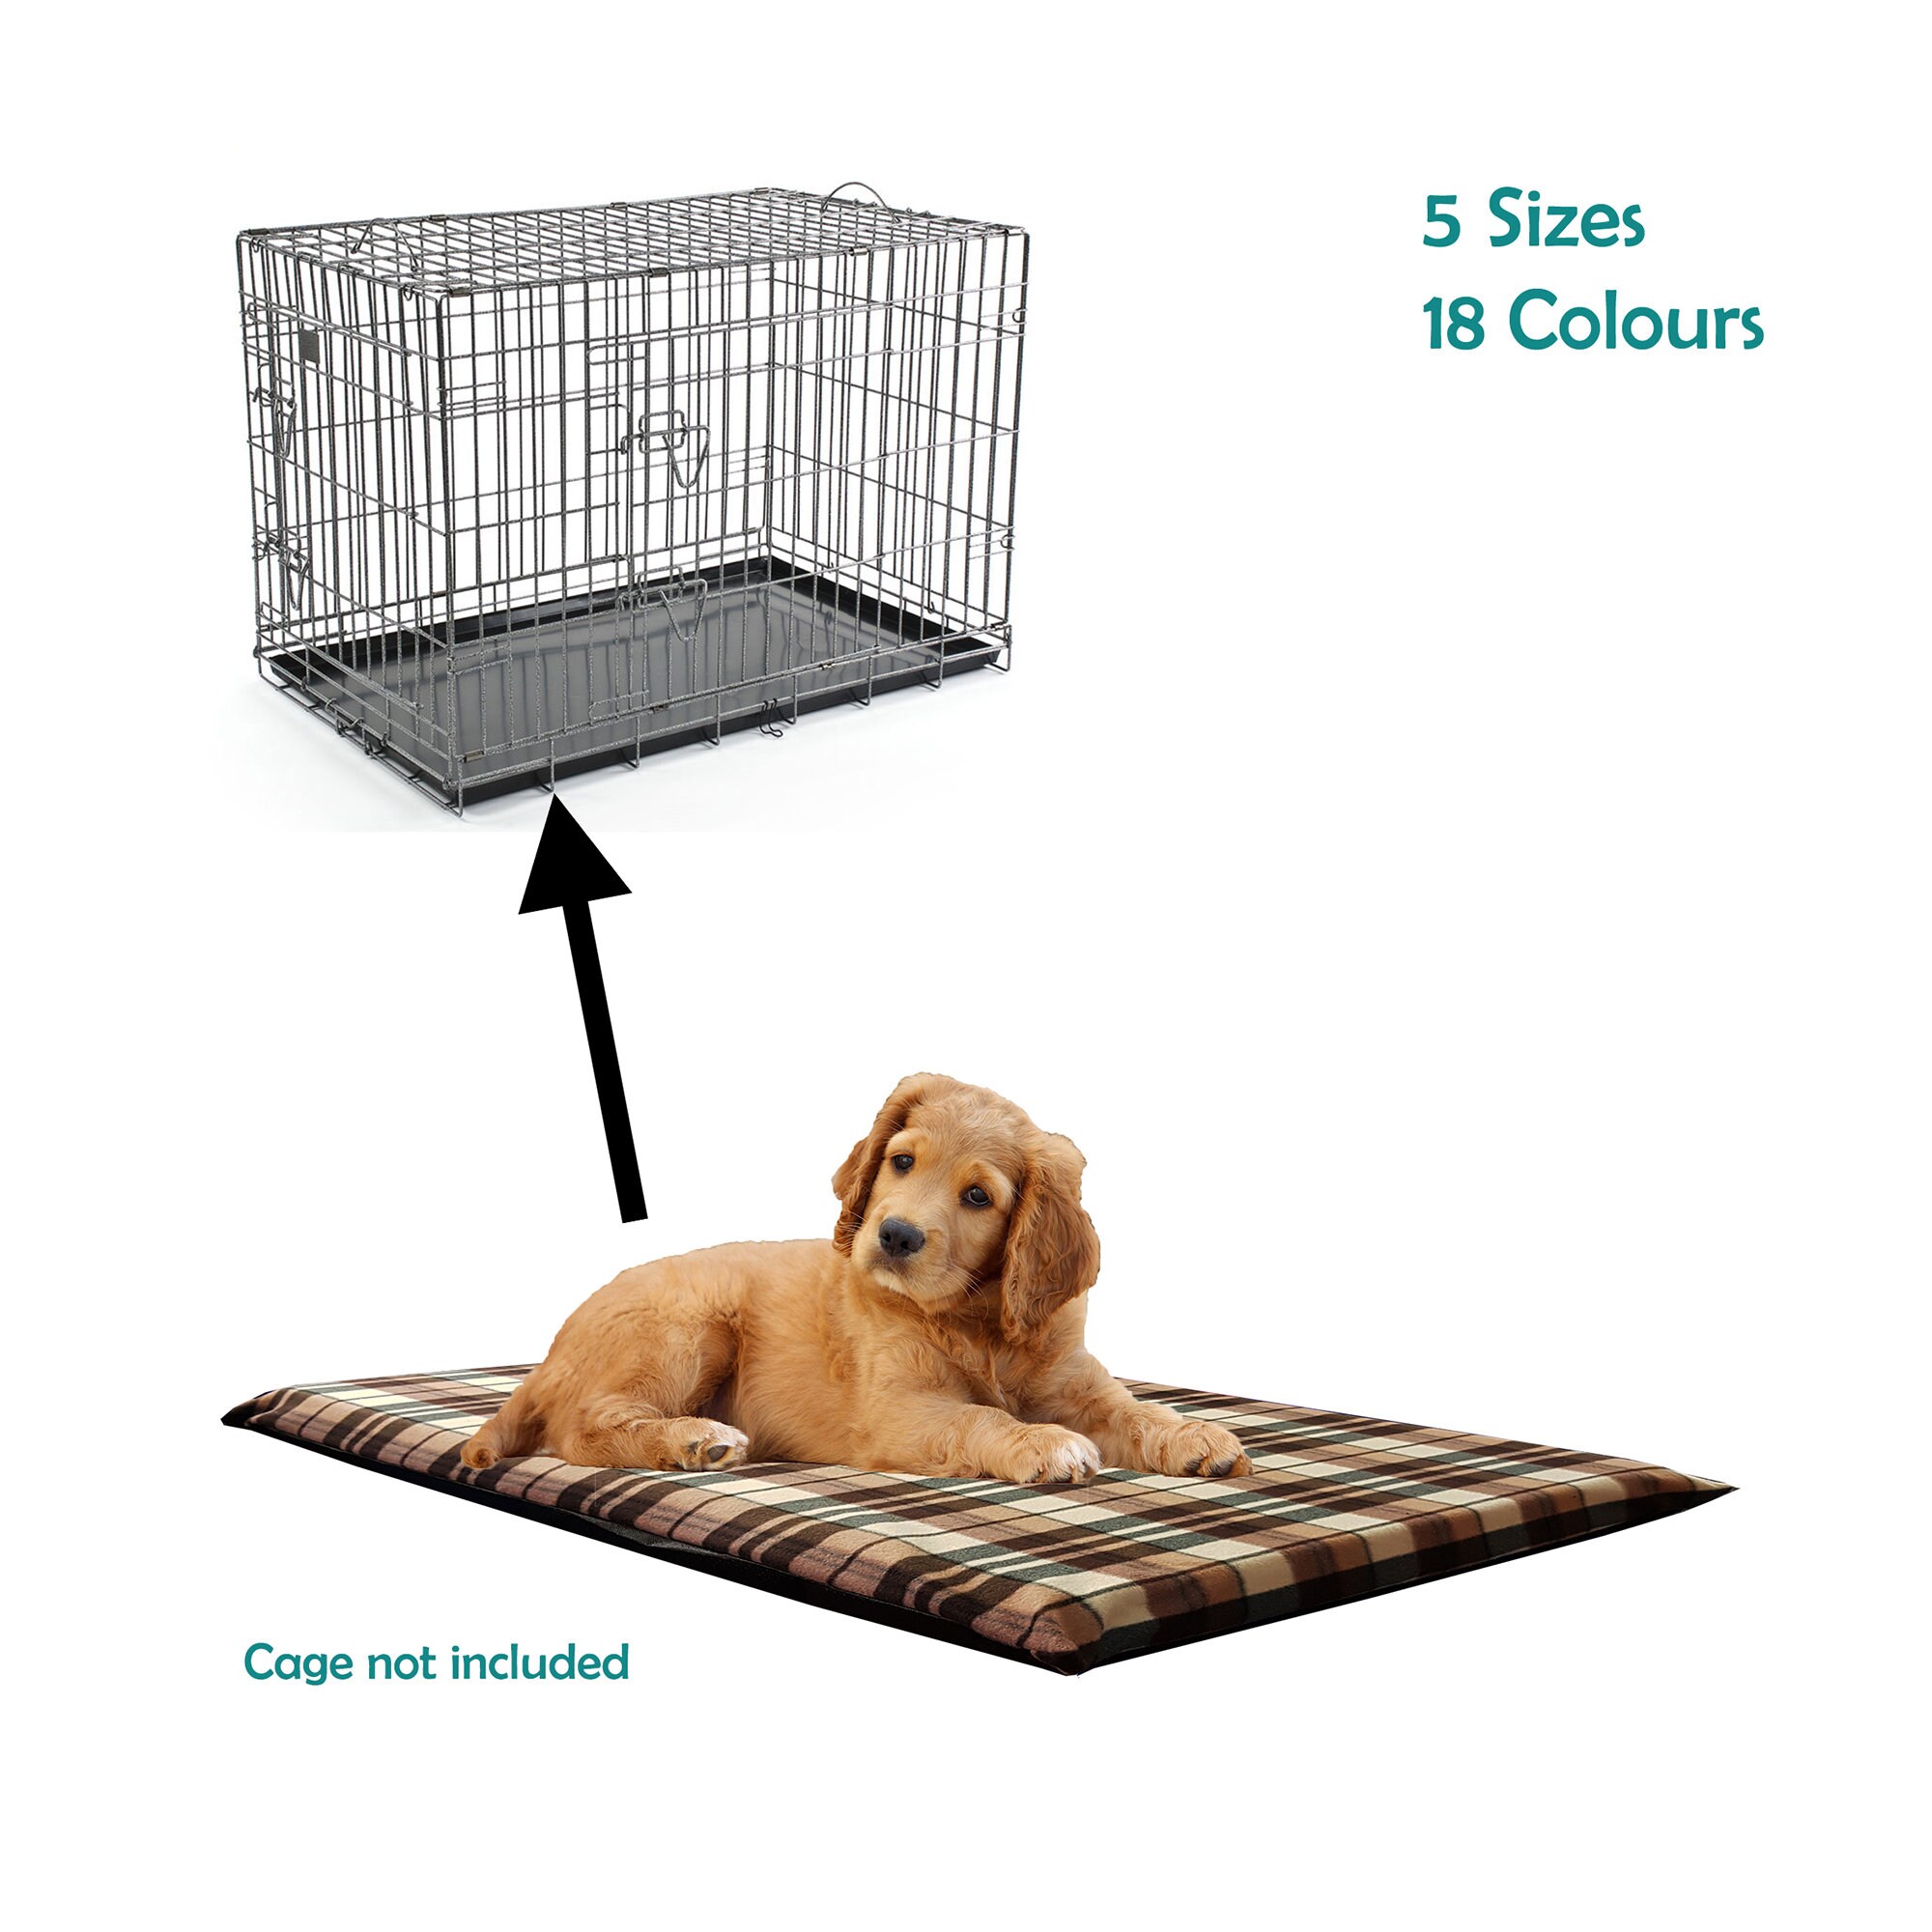 Perfect Sleep Bedding Pads for Carrier Cage QIAOQI Dog Bed Kennel Pad Waterproof Crate Mat Washable Chew Proof Orthopedic Antislip Beds Dense Memory Foam Cushion Padding Bolster 